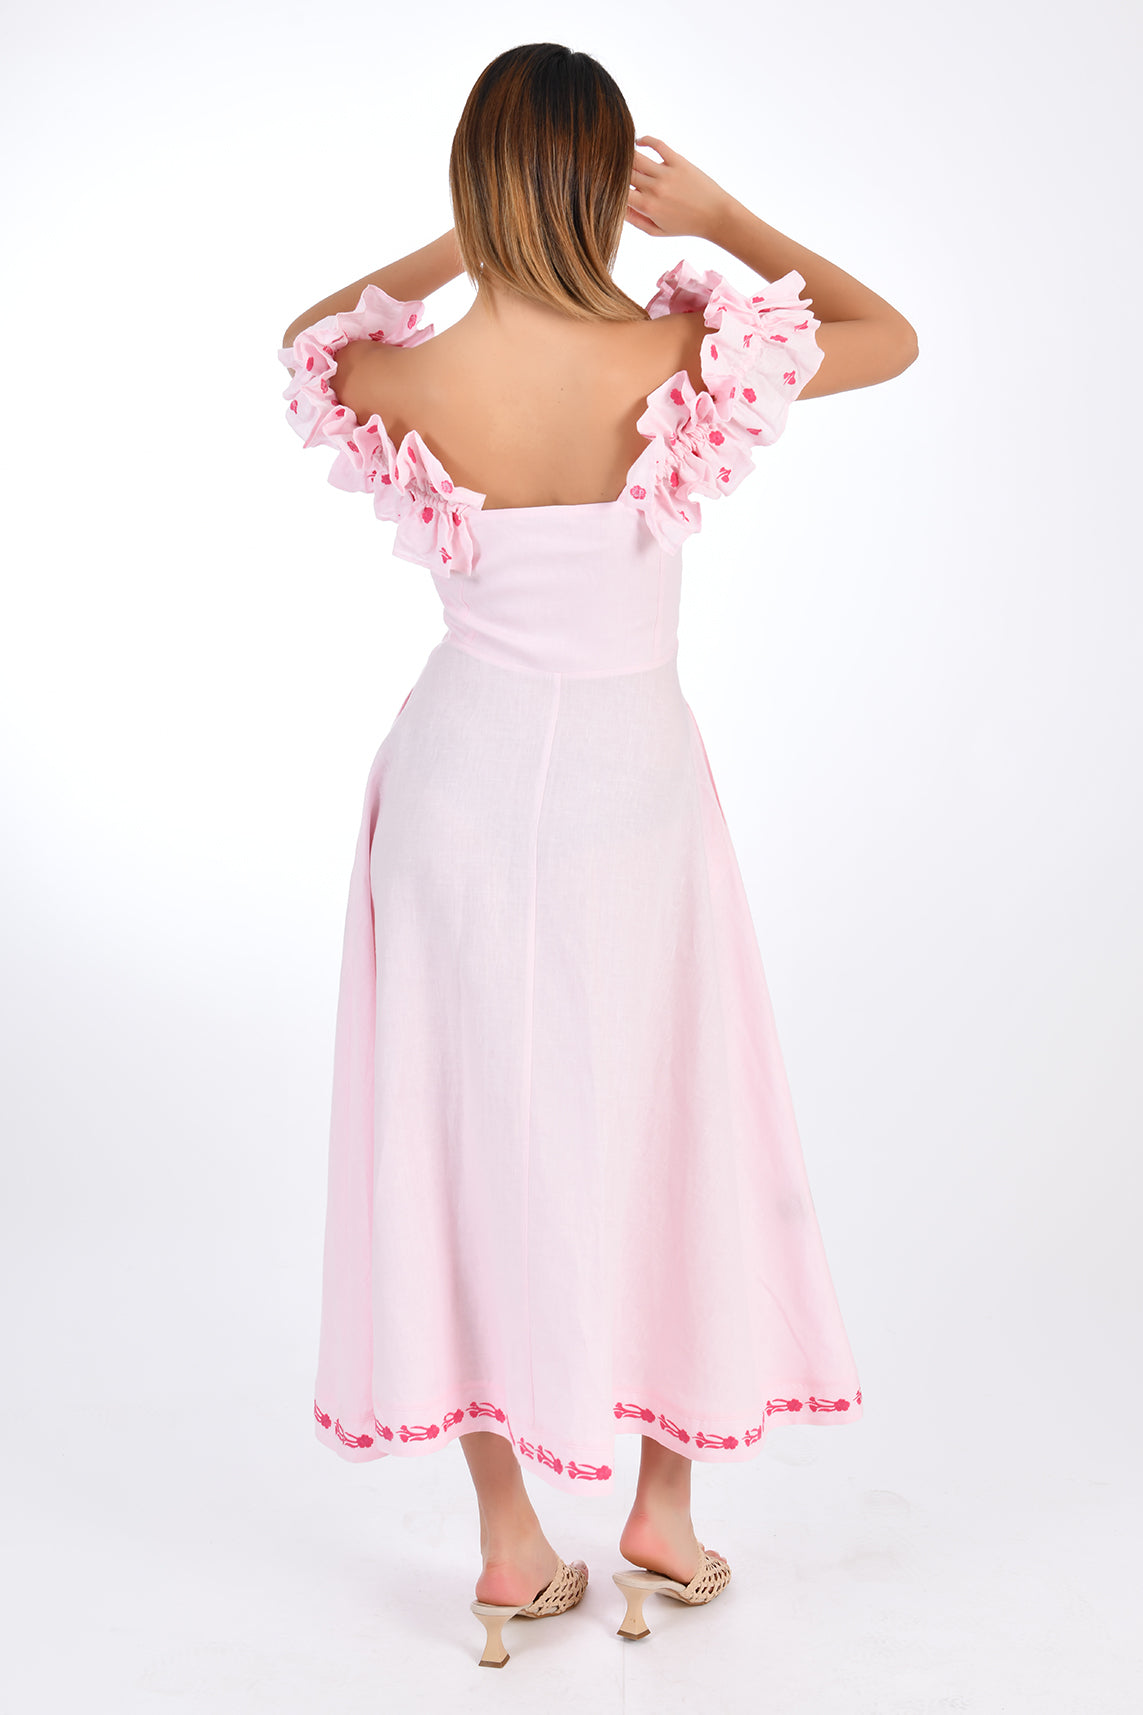 FANM MON ALYA LINEN DRESS. On/Off The Shoulder Hand-Embroidered Applique Midi Linen Dress, back view.